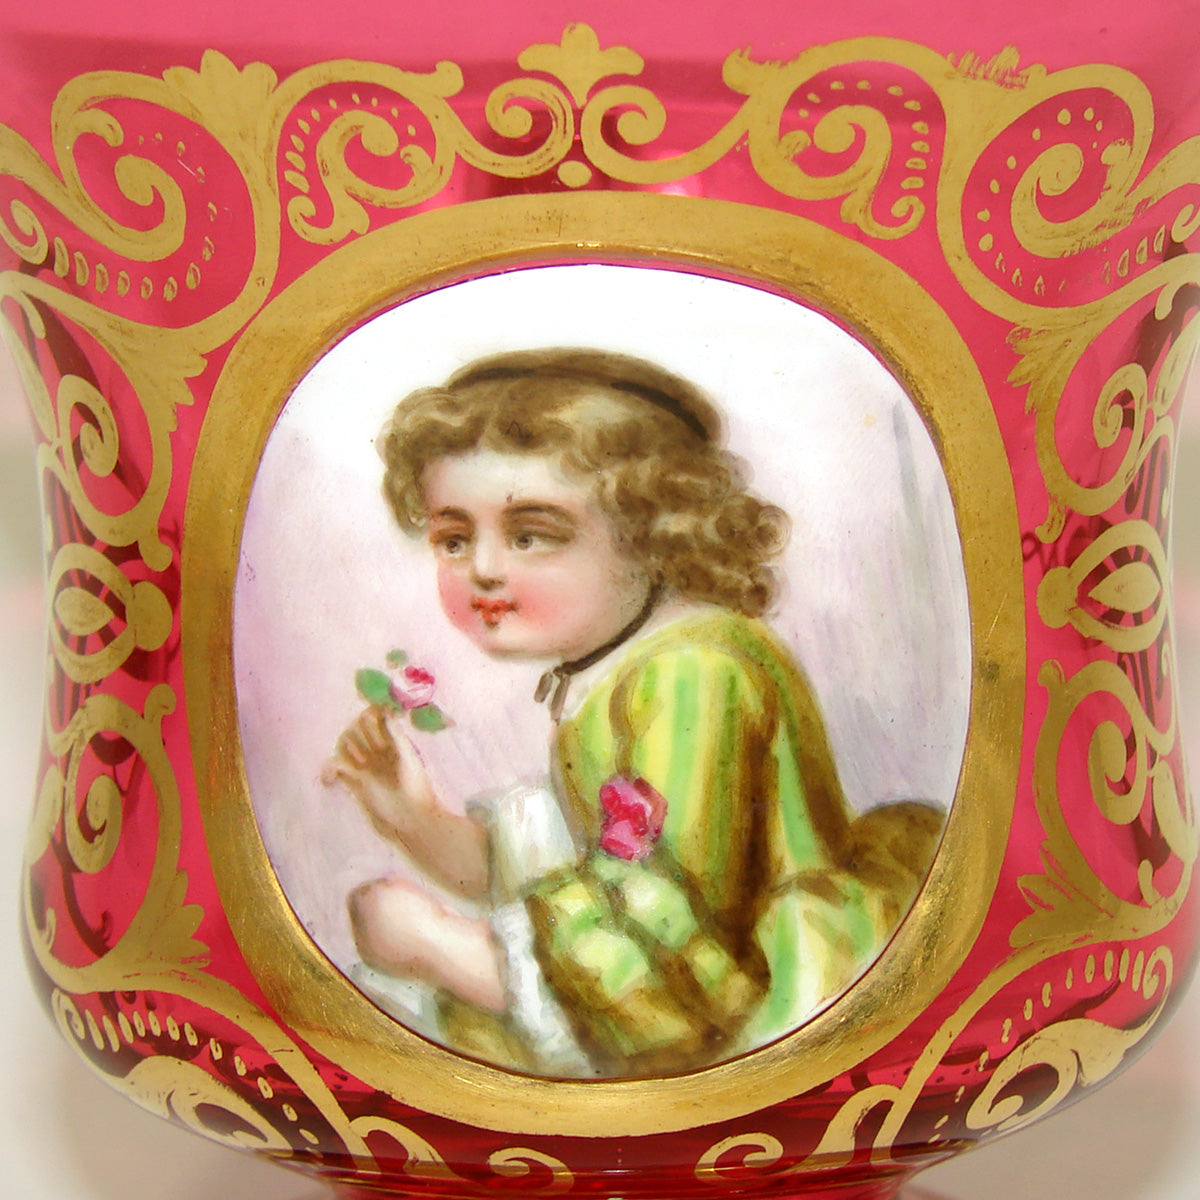 Rare Antique Moser Cranberry Glass Tea Cup & Saucer, Hand Painted Portrait of Child with Flowers